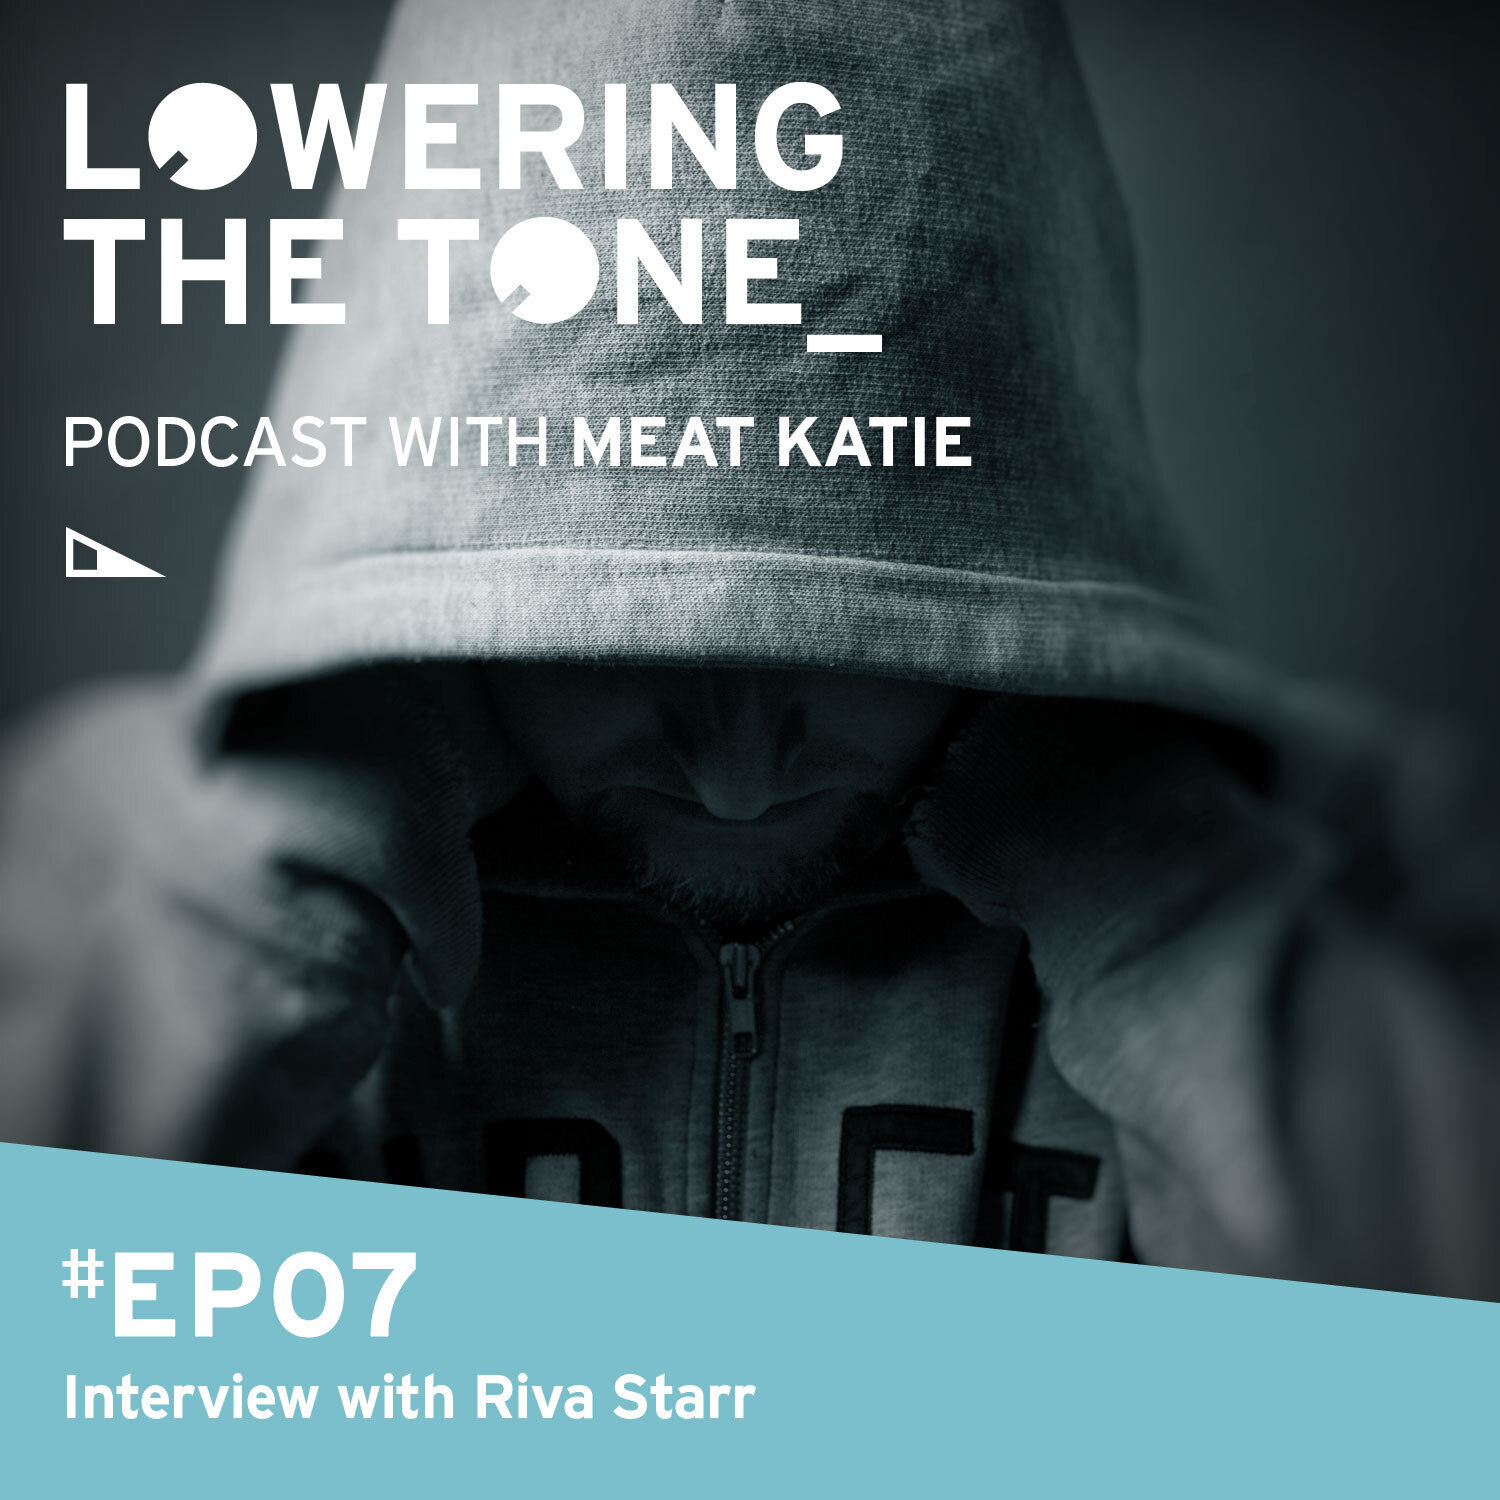 Meat Katie 'Lowering The Tone' Episode 7 - (Interview with Riva Starr)